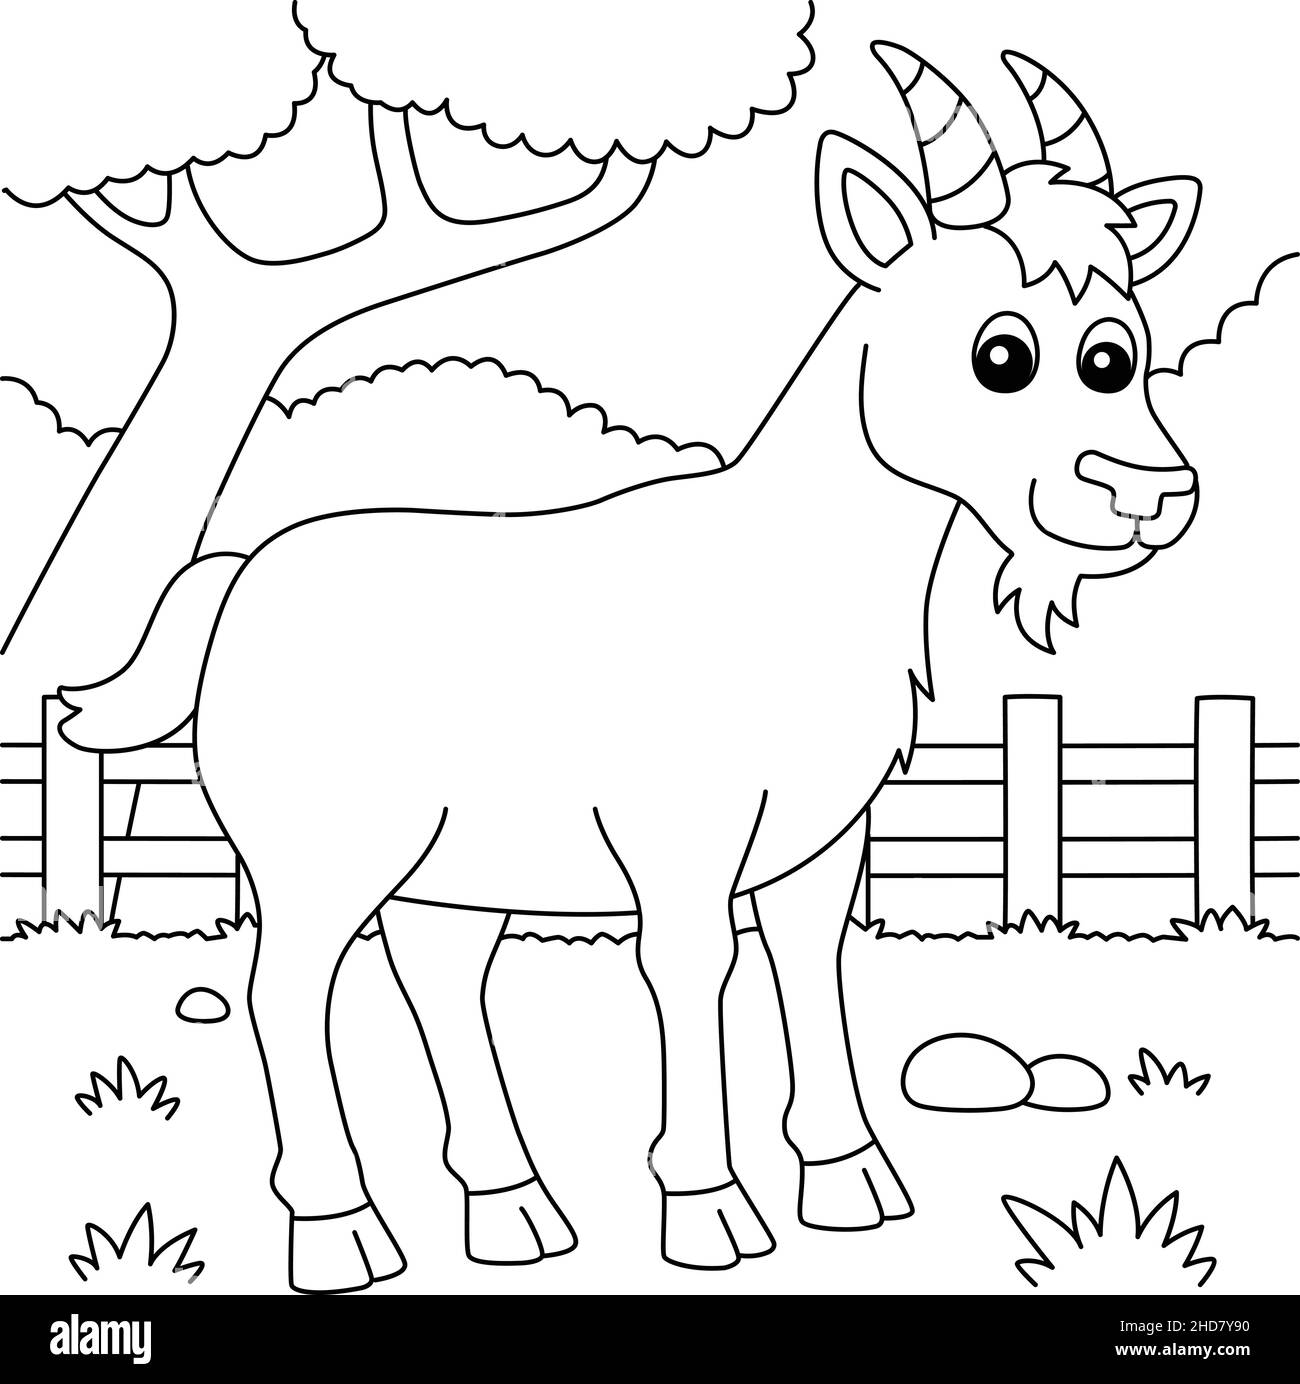 Goat coloring page for kids stock vector image art